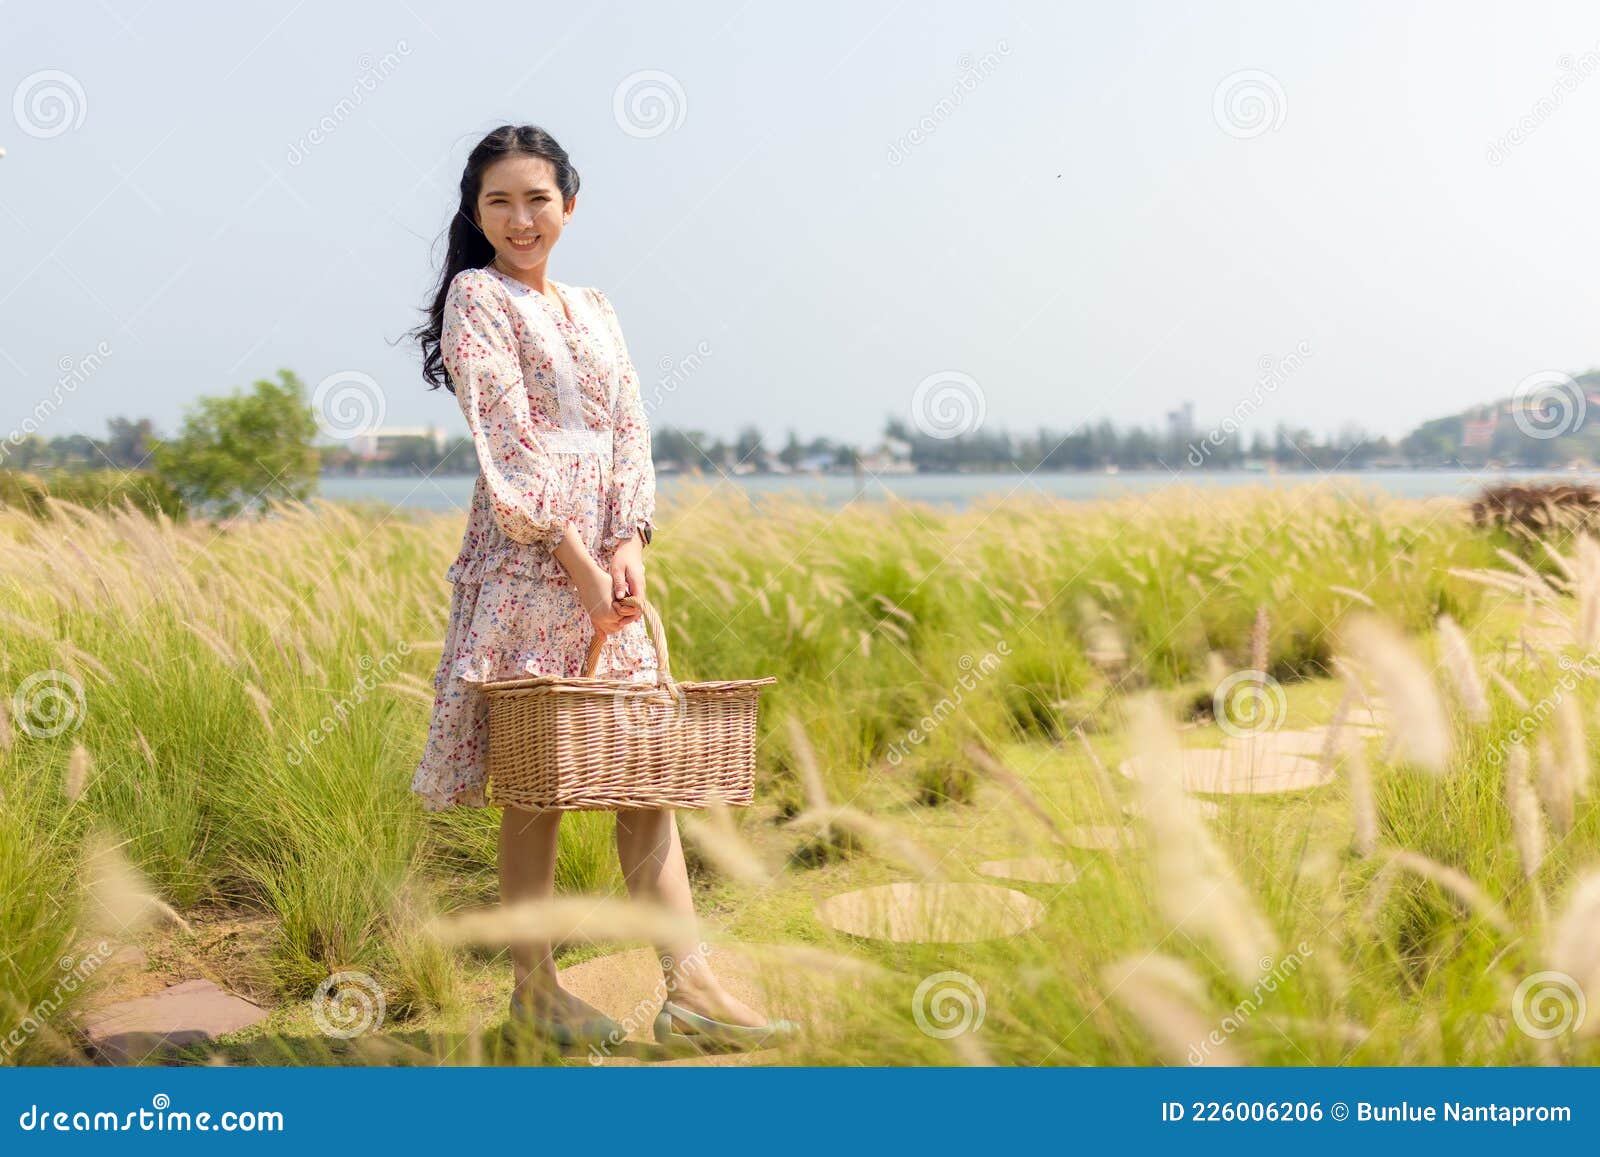 portrait of an asian girl seeking calm and tranquillity in a floral garden